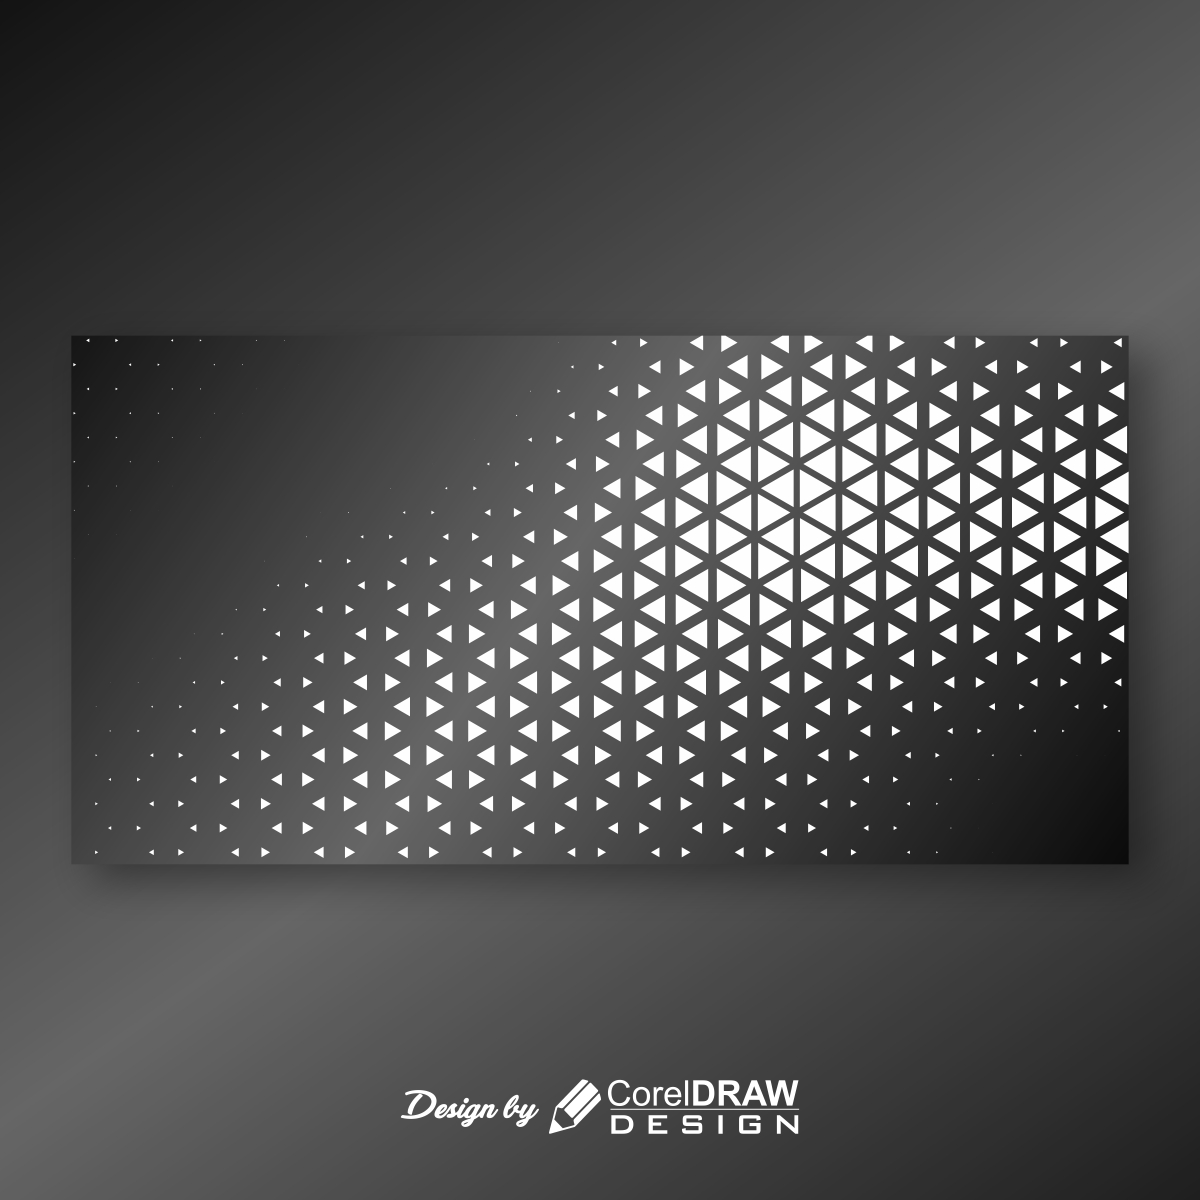 Poly Black and White background 2021 trending Free vector Cdr download